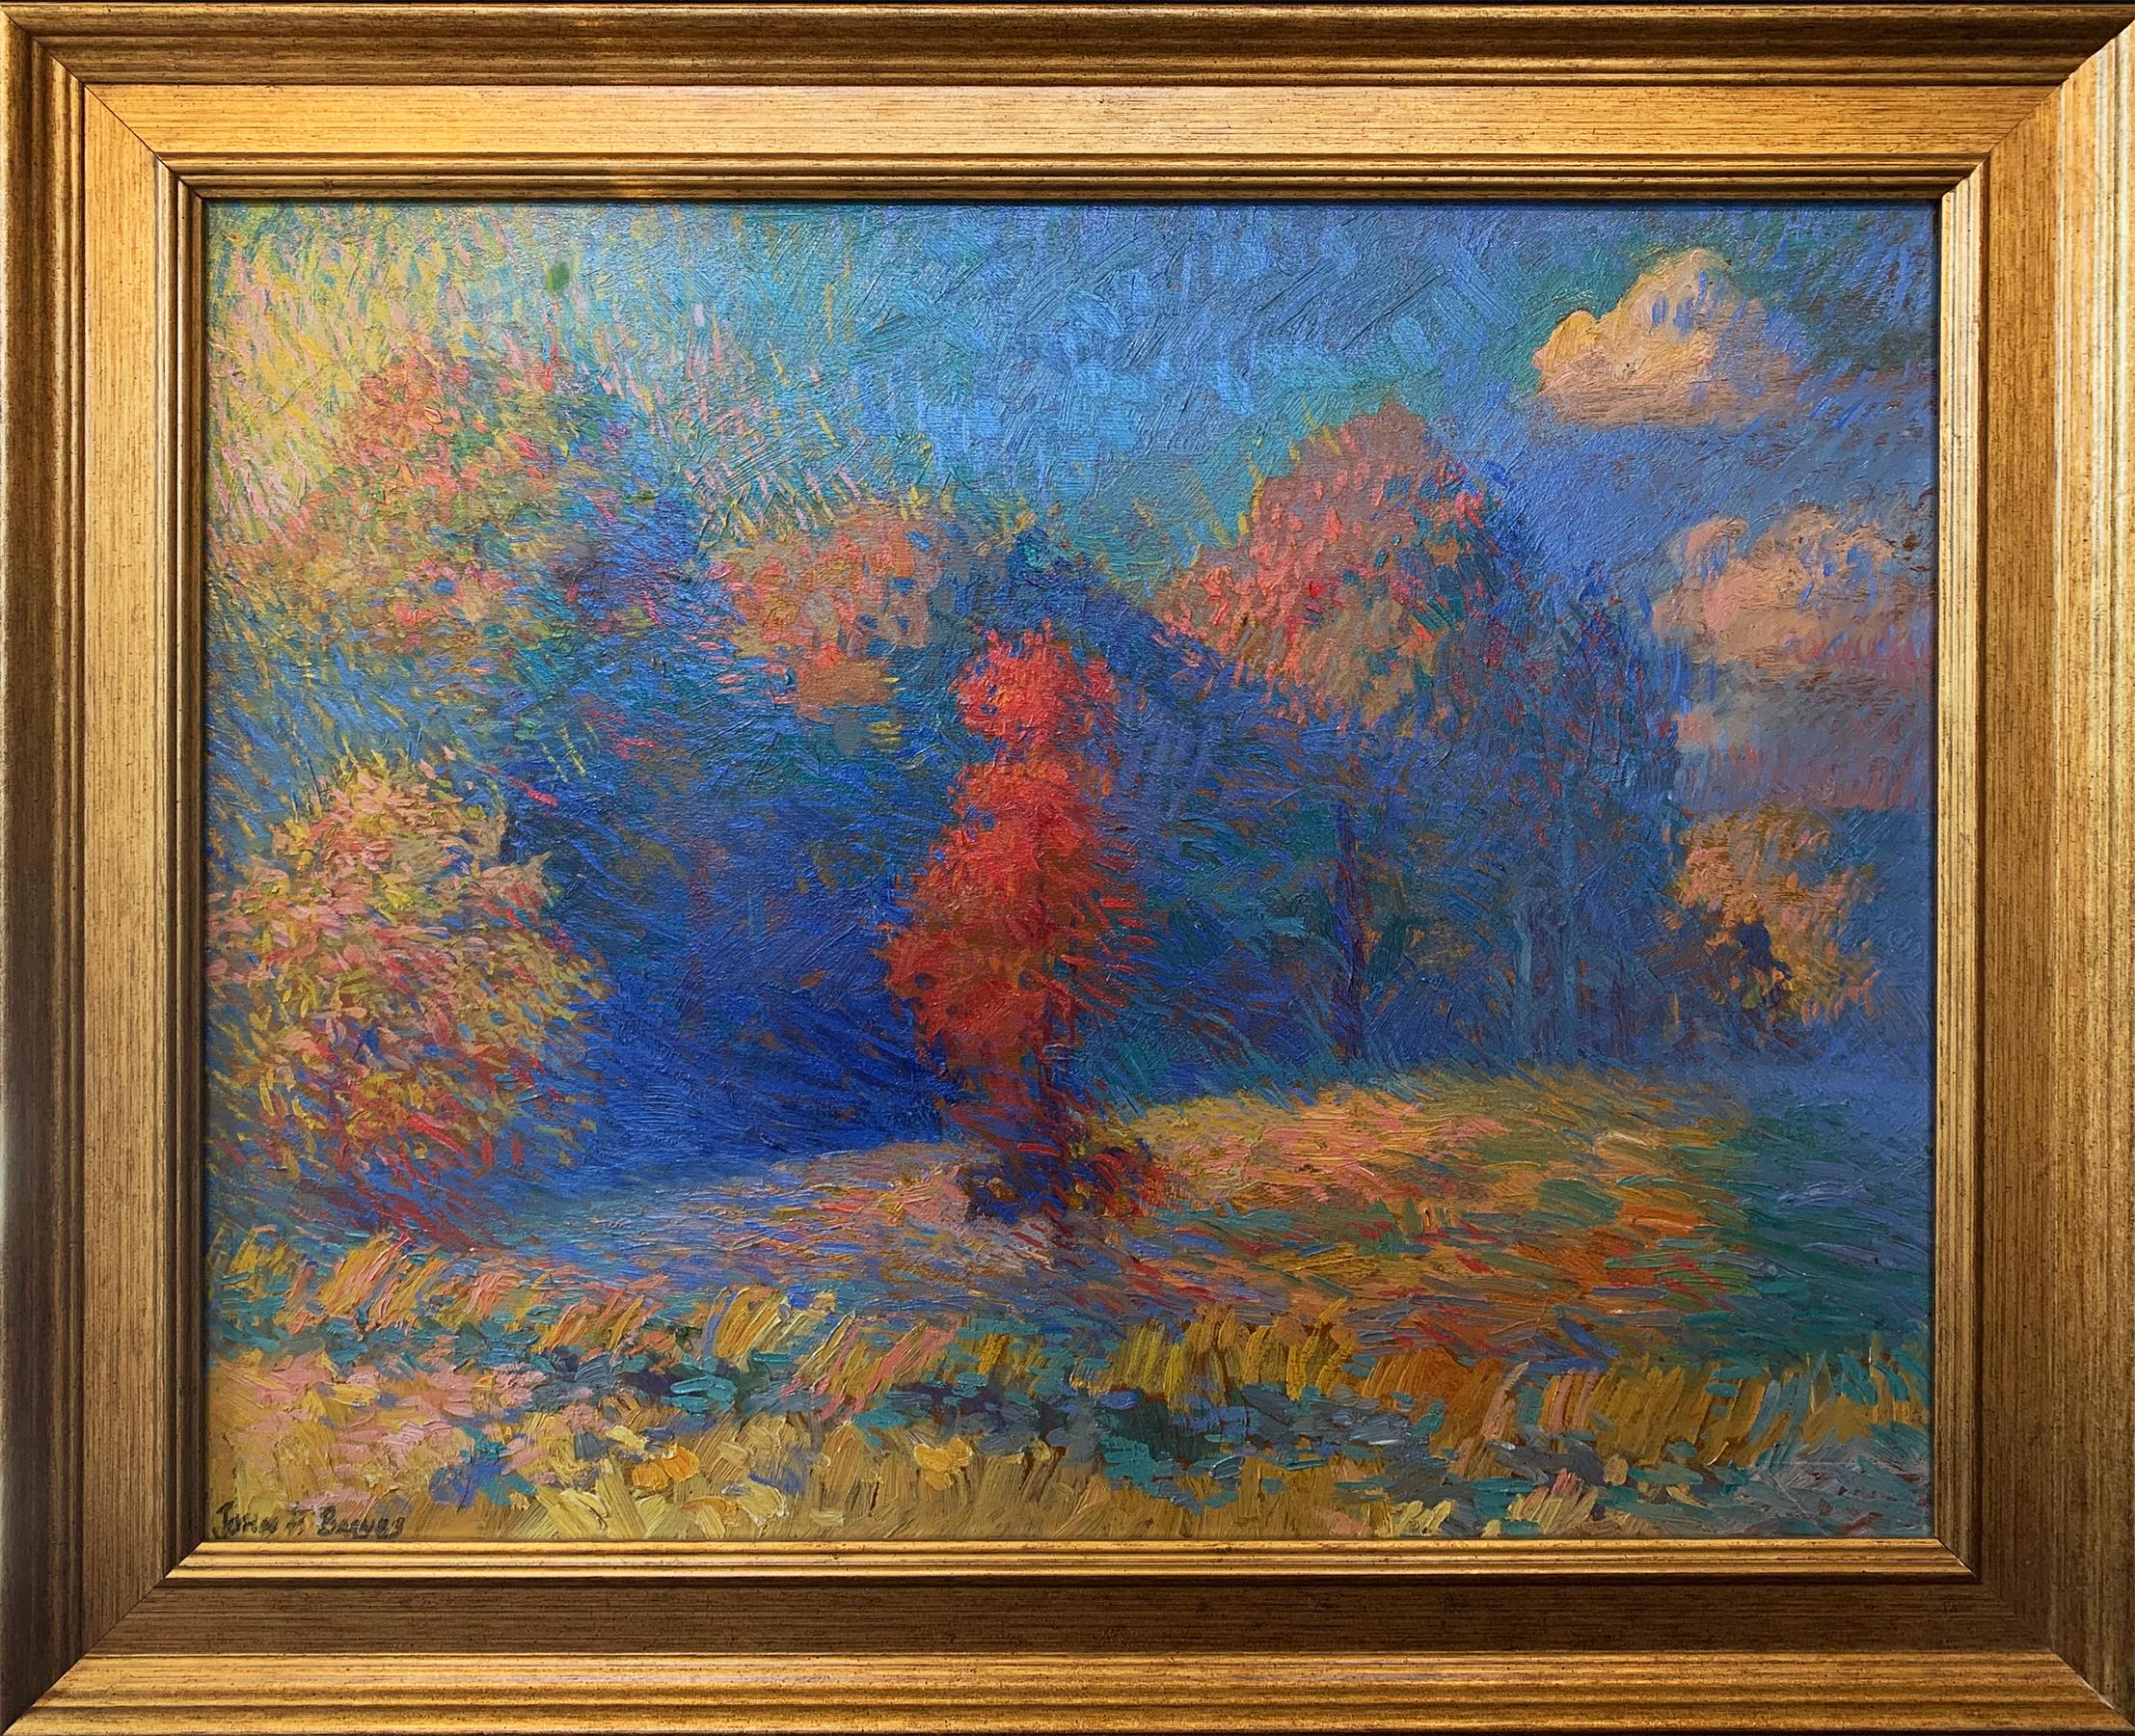 "All Alone" by John Pierce Barnes is a 16" x 20" oil on board landscape painting. The artwork was purchased from the artist's family, it is signed "John P. Barnes" on the lower left. He began a second painting on the back of the board. Additional